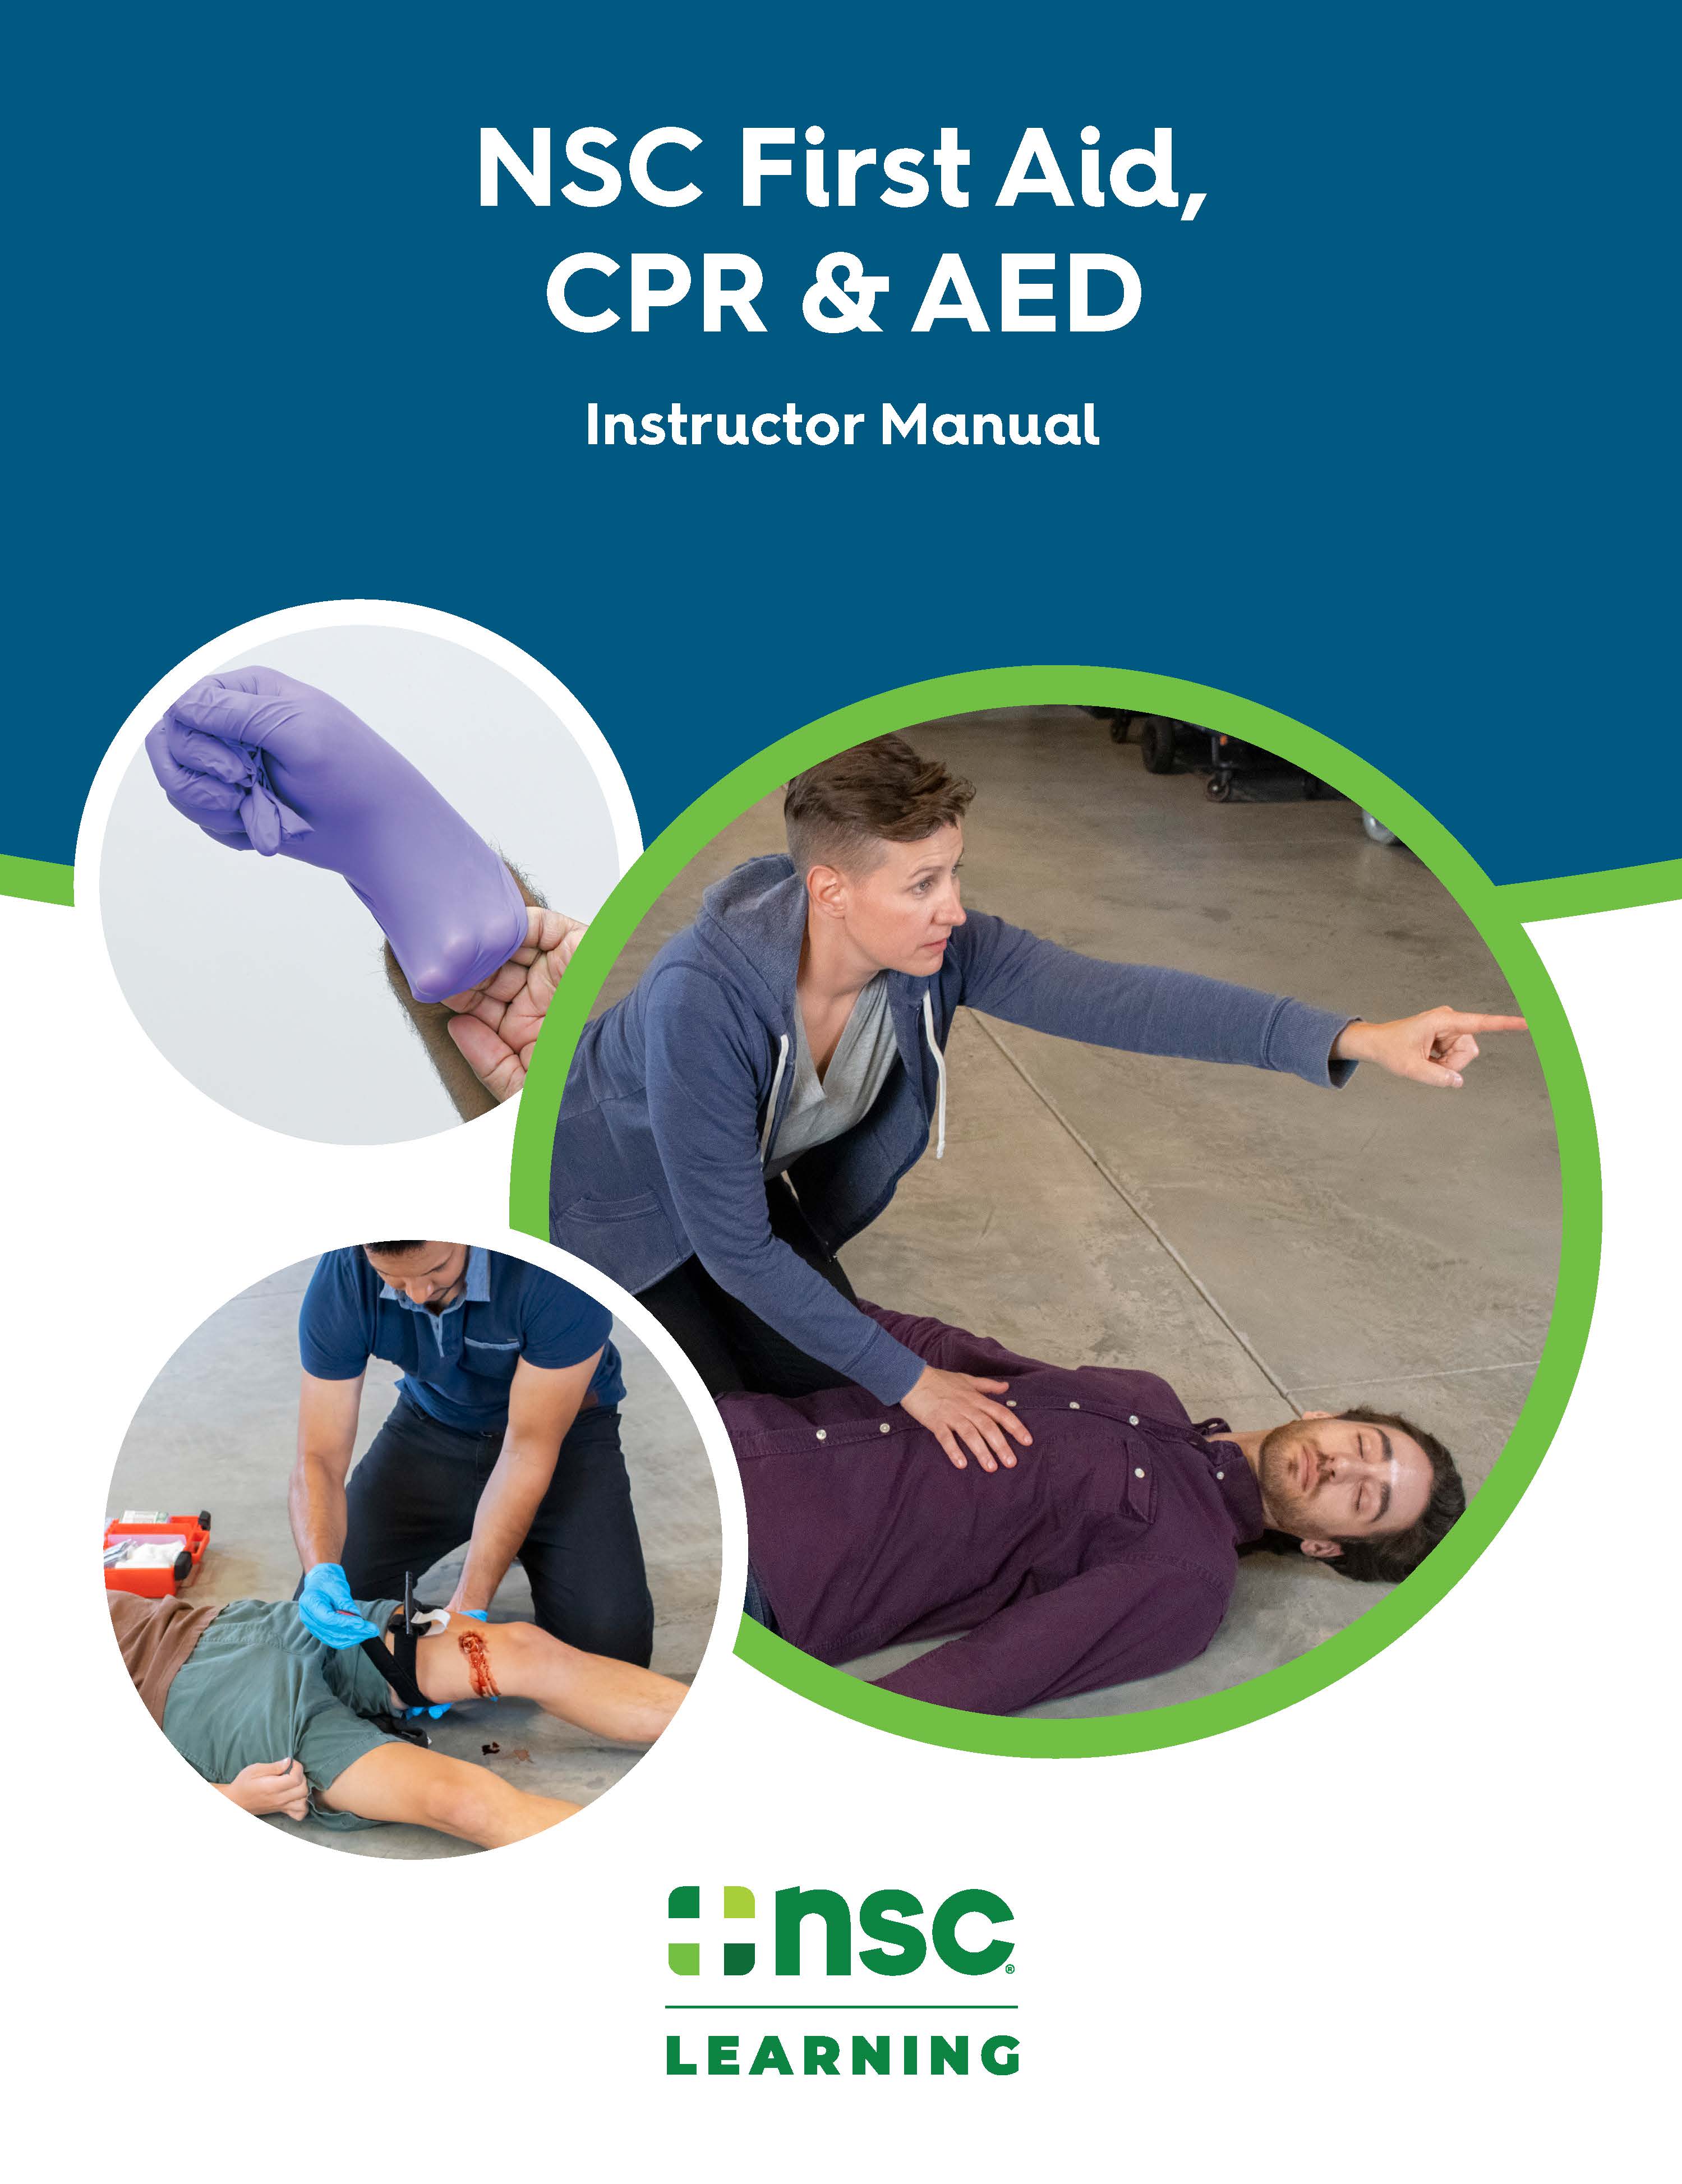 NSC First Aid, CPR & AED Instructor Resource eKit